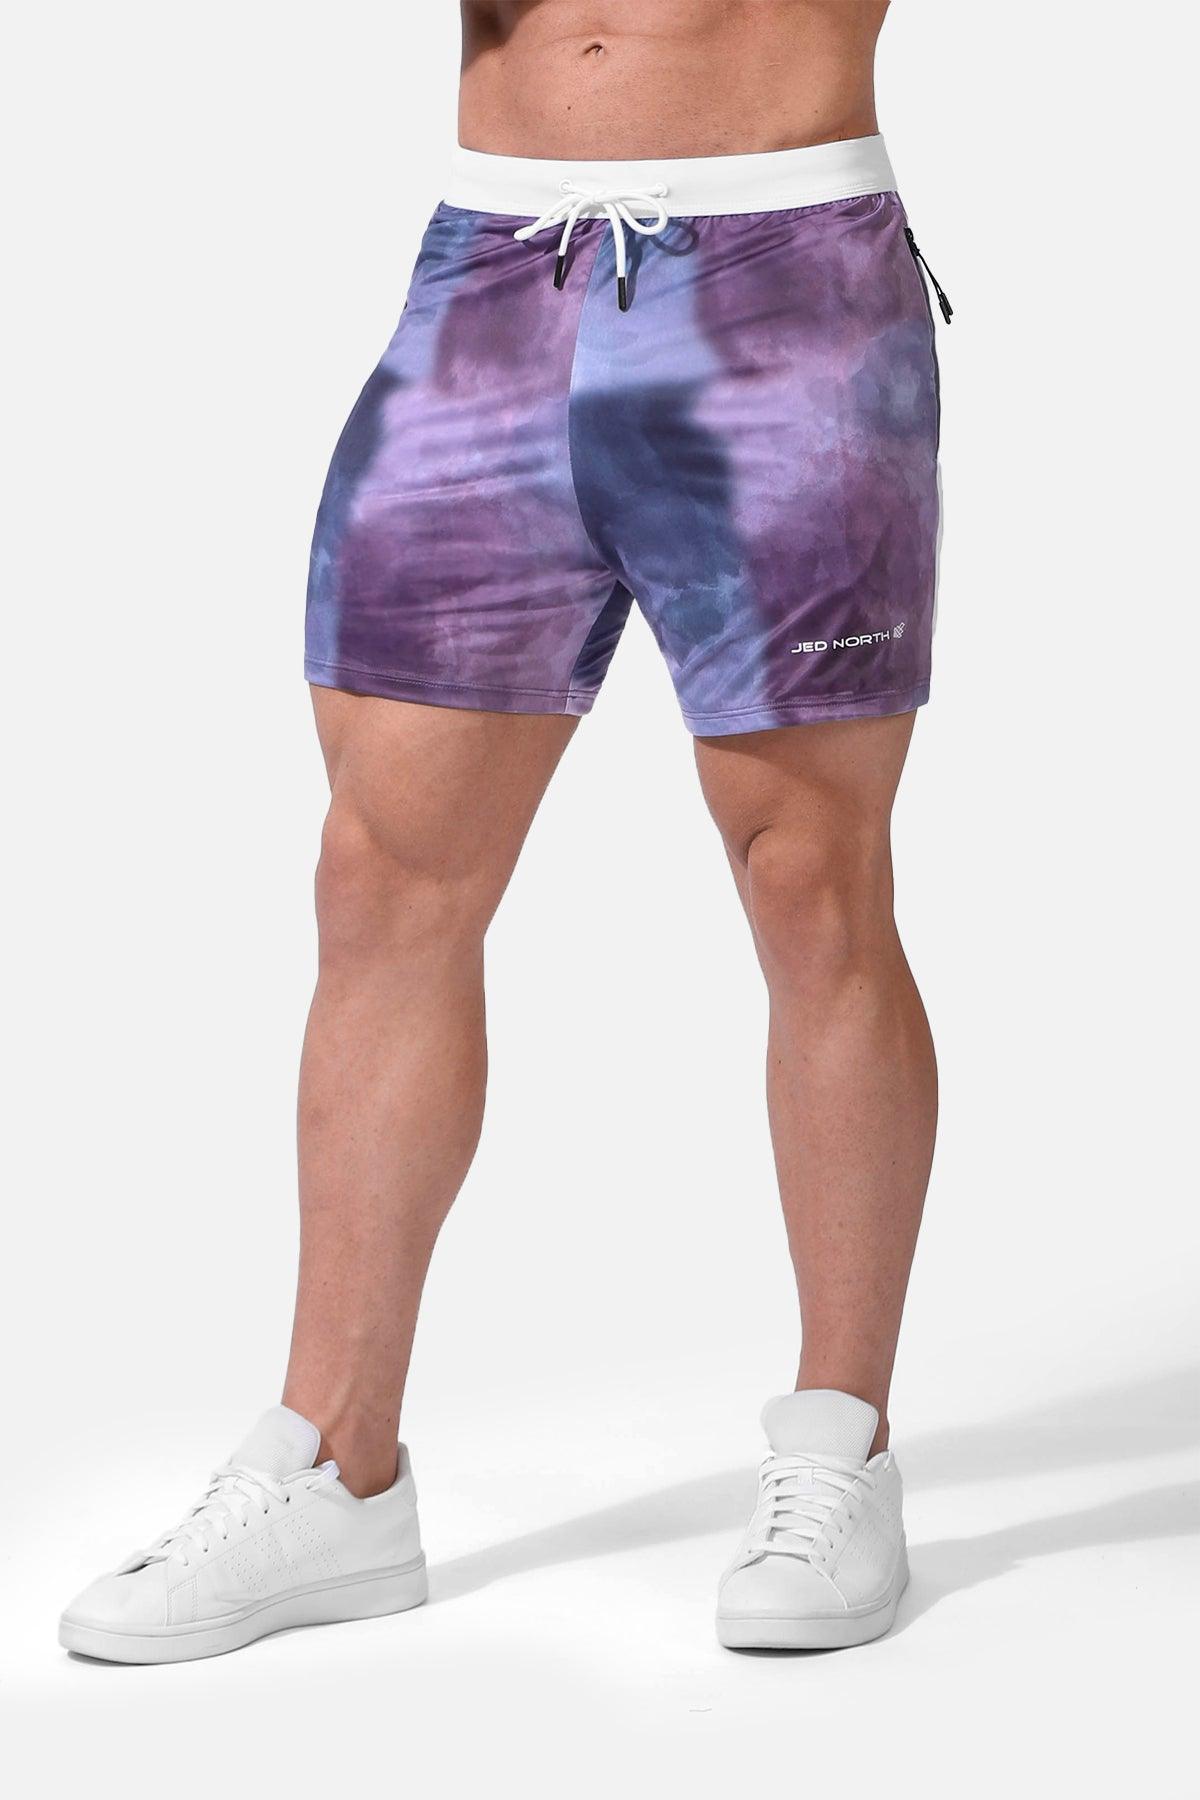 Ace Graphic Casual 5" Shorts 2.0 - Purple Smoke - Jed North